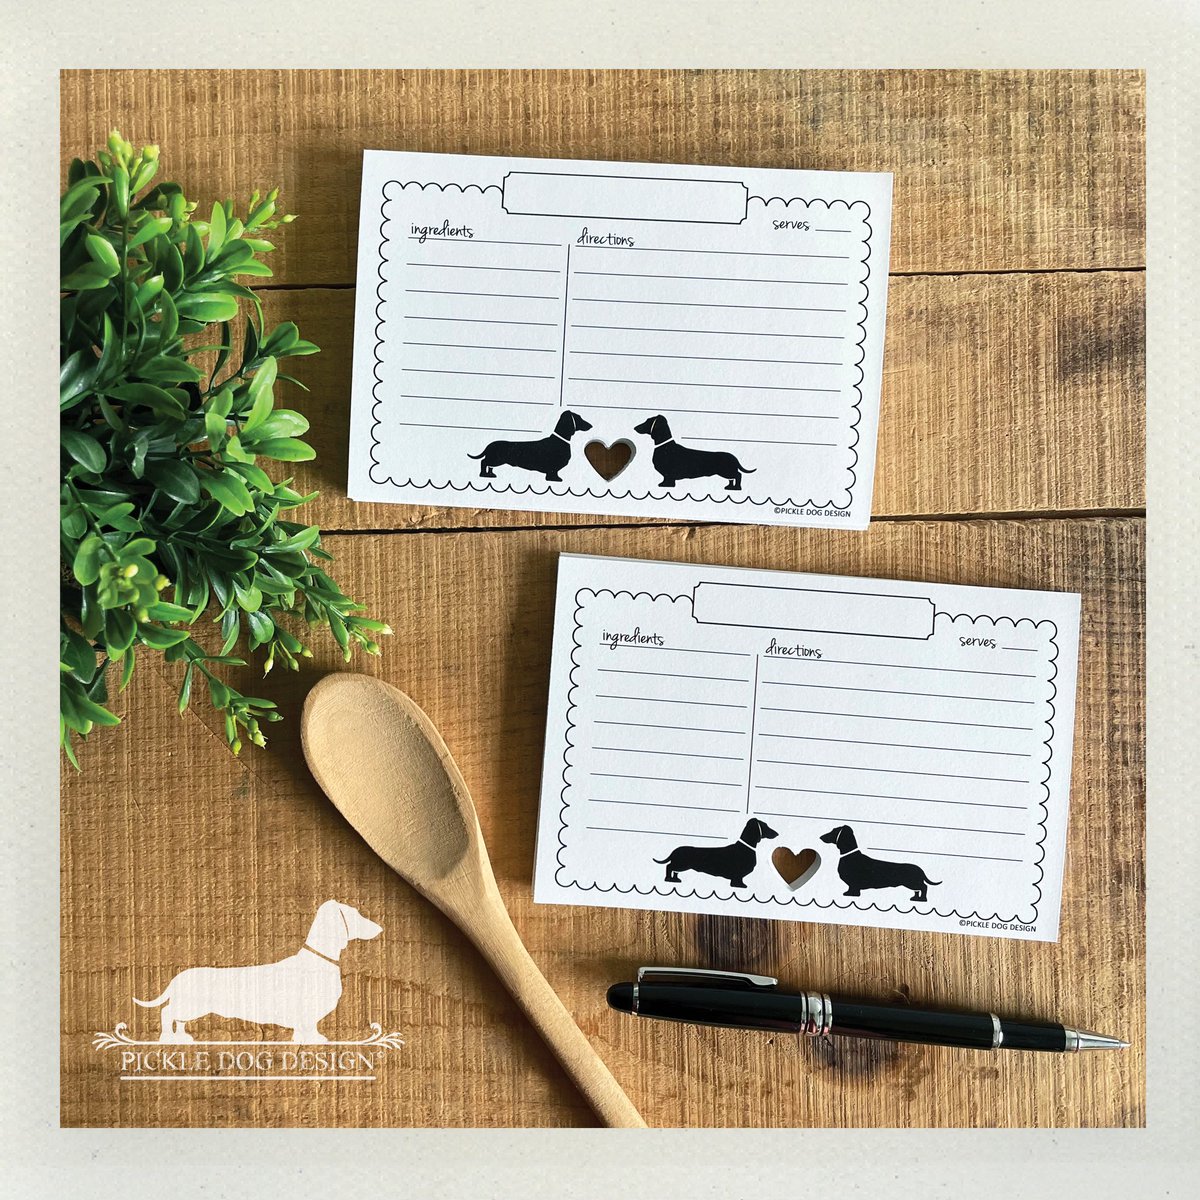 No kitchen is complete without a dachshund at your feet. ❤️ These 4x6 recipe cards are available in white, ivory, and brown kraft: pickledogdesign.etsy.com/listing/174975…

#recipecards #recipecard #recipe #kitchen #cooking #baking #recipebox #bakersdozen #shopsmall #giftforher #dachshund #doxie